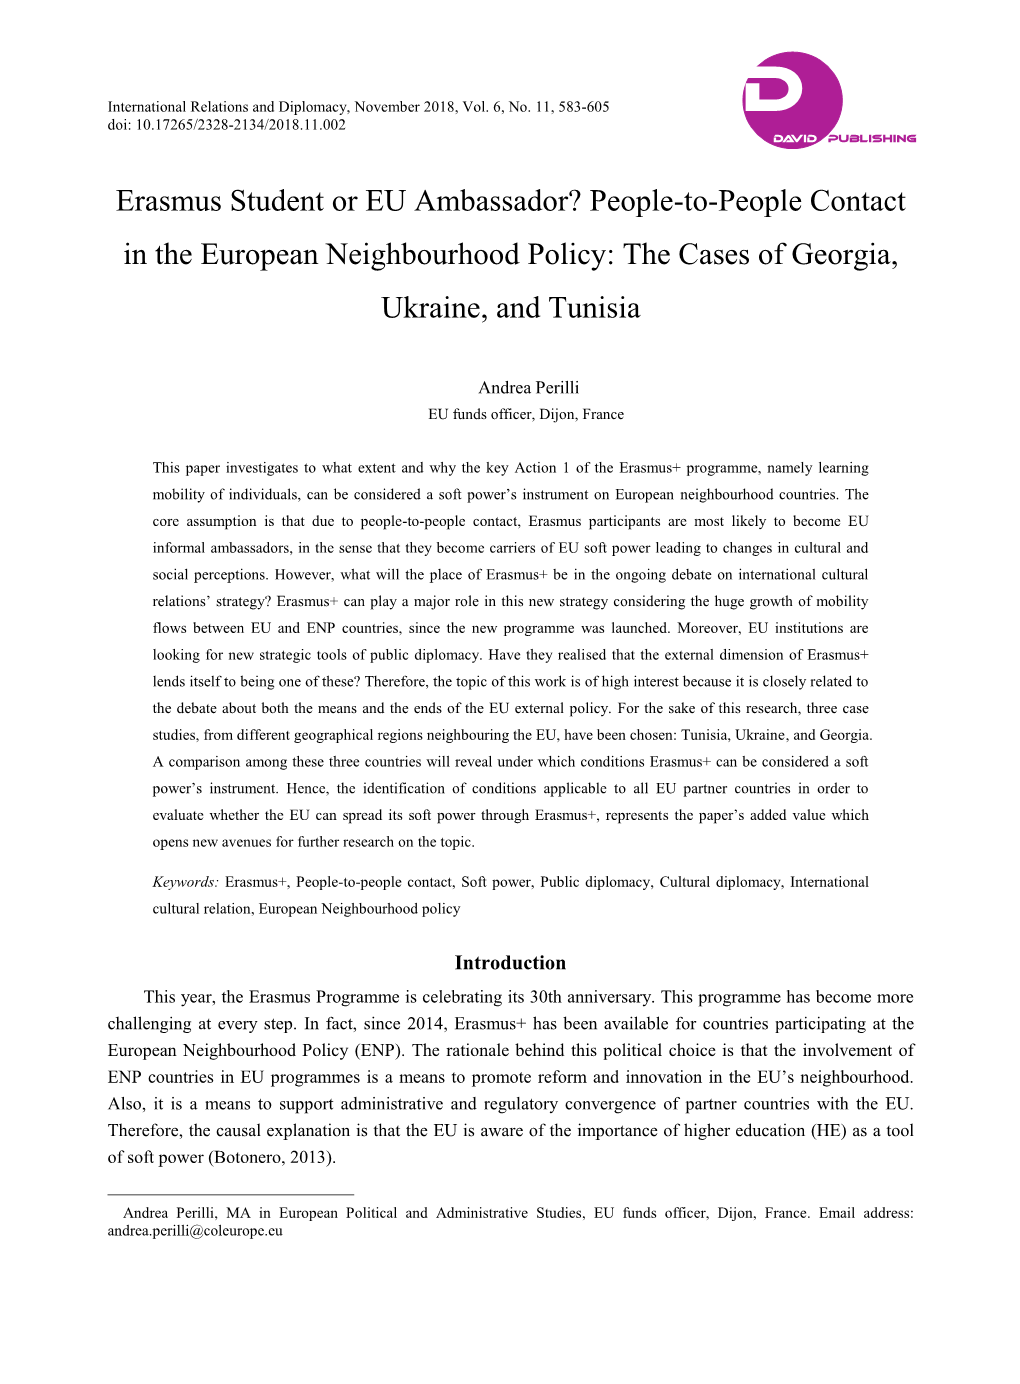 Erasmus Student Or EU Ambassador? People-To-People Contact in the European Neighbourhood Policy: the Cases of Georgia, Ukraine, and Tunisia